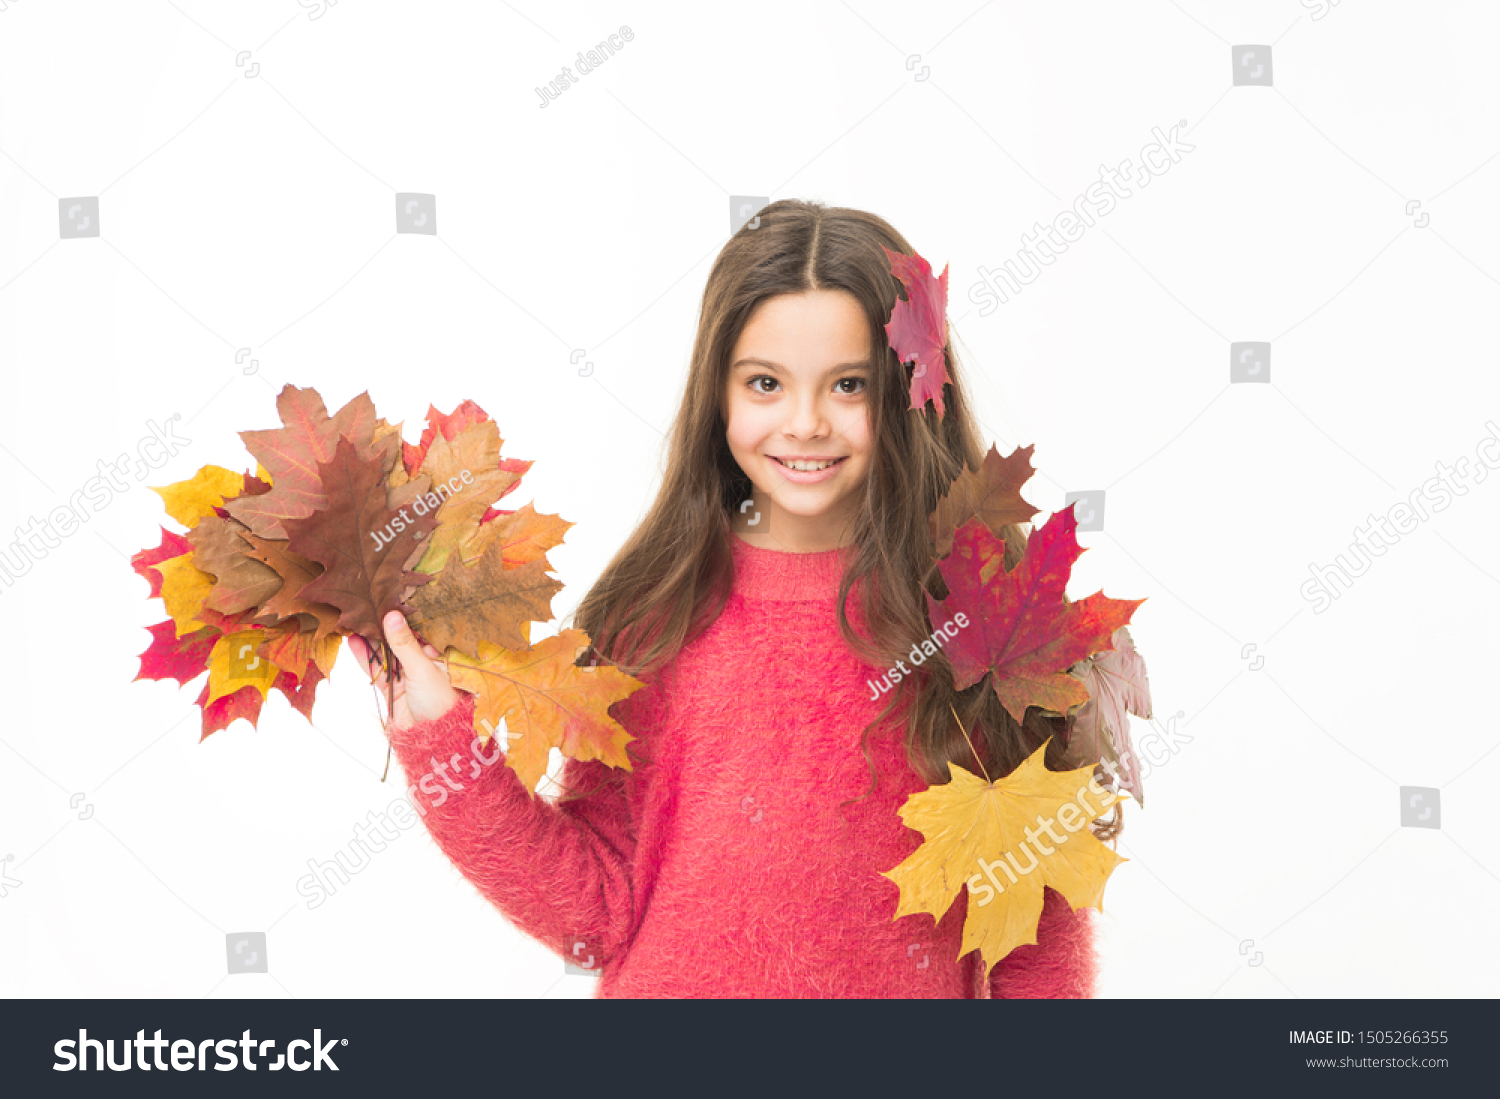 Fall season. Kid with fallen leaves white background. Happy small girl maple leaves. Autumn pleasures. Cozy days. Childhood happiness. Collecting autumn leaves. Nature changing color. Seasons concept. #1505266355